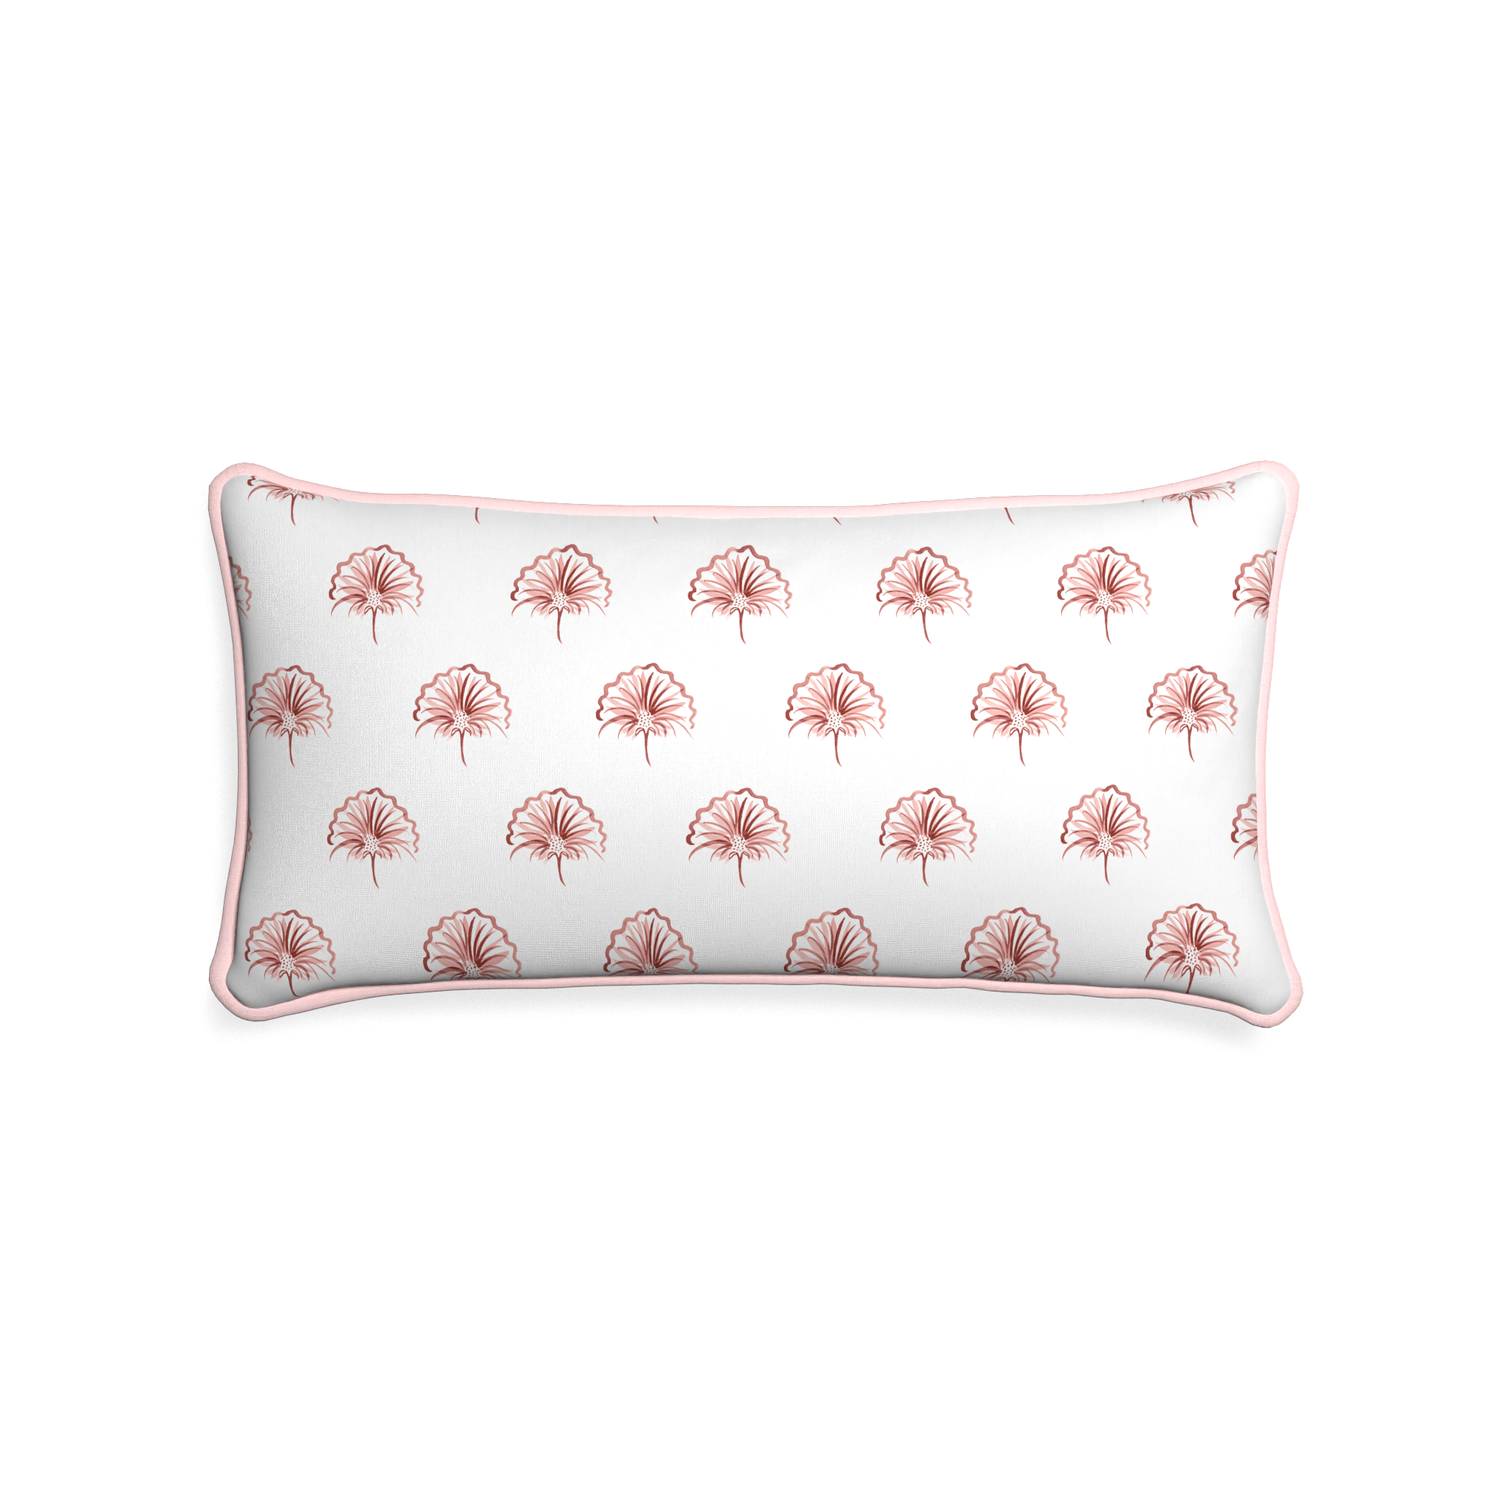 Midi-lumbar penelope rose custom floral pinkpillow with petal piping on white background